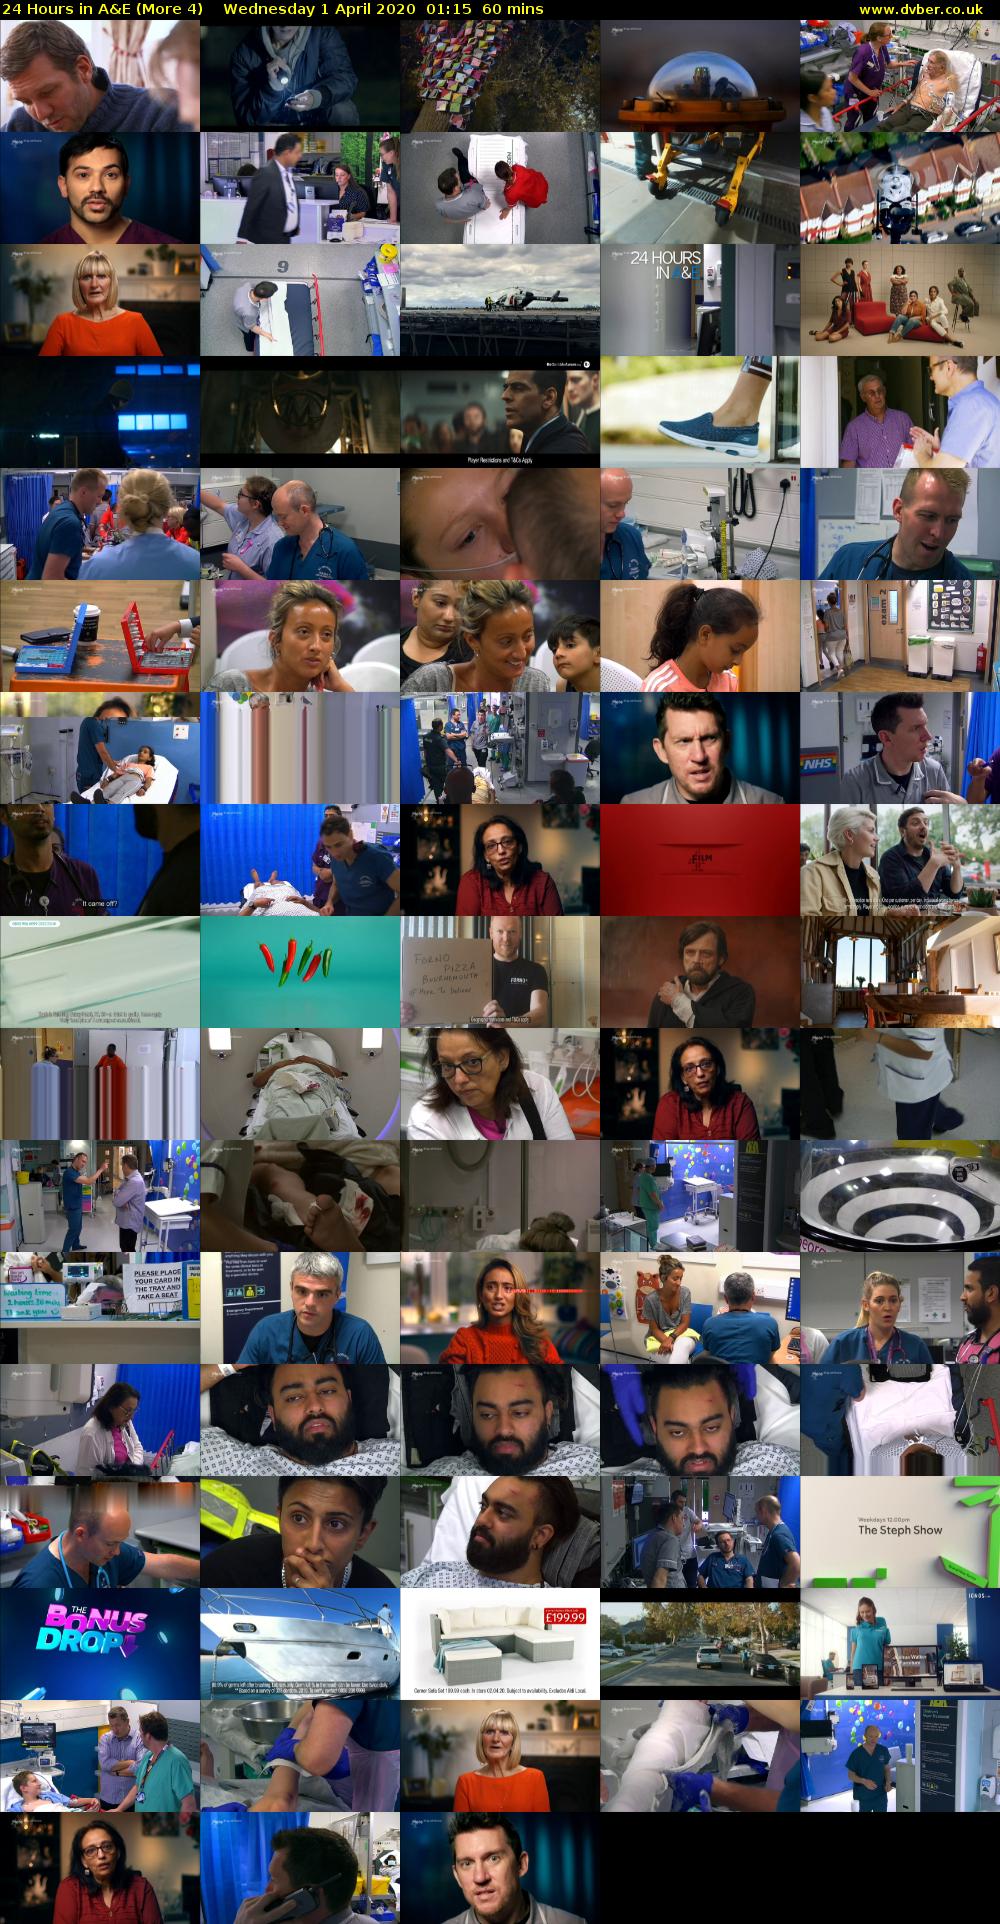 24 Hours in A&E (More 4) Wednesday 1 April 2020 01:15 - 02:15